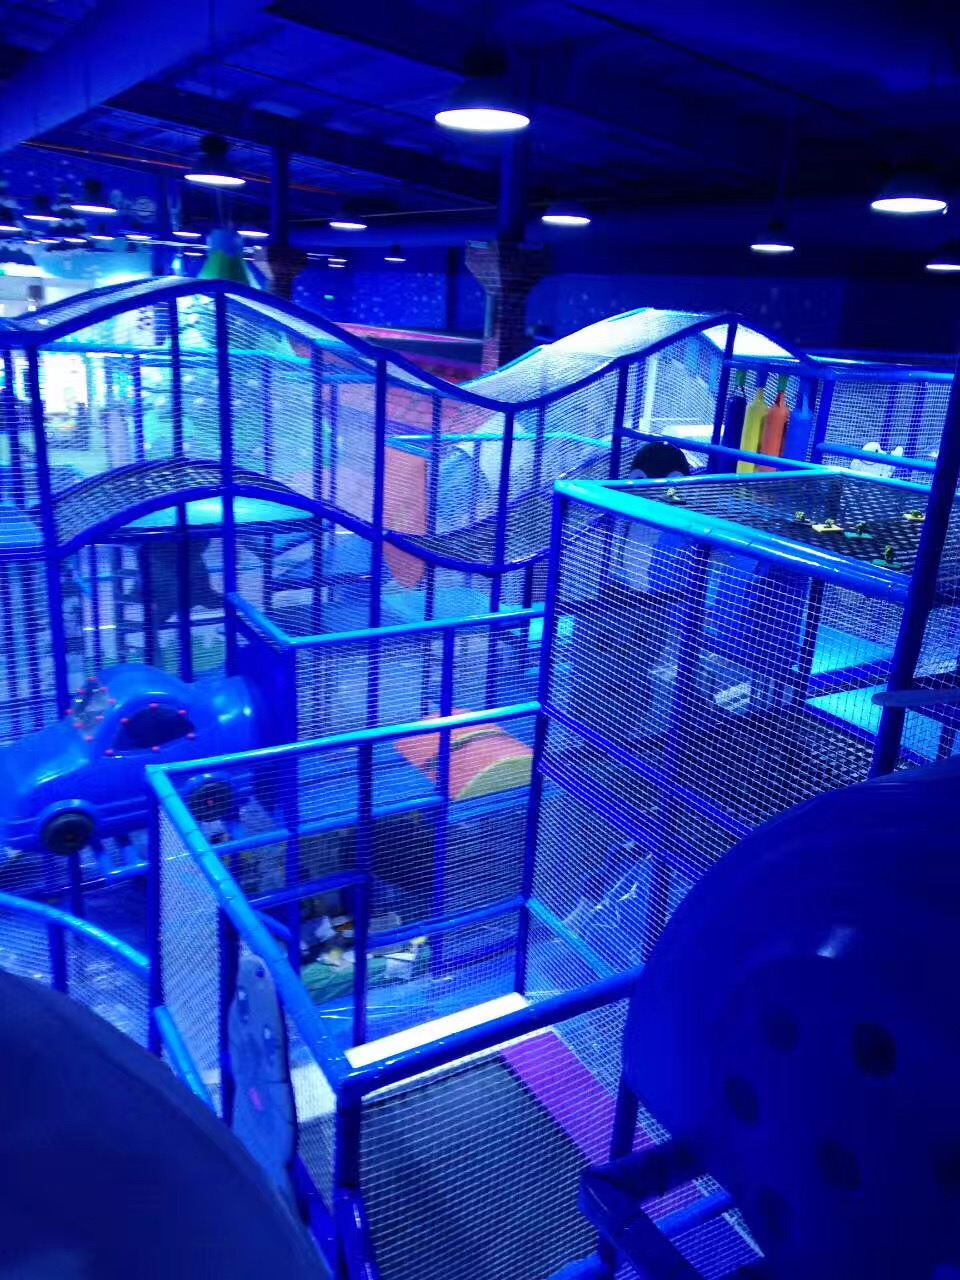 5 Levels Space Themed Kids Soft Playground